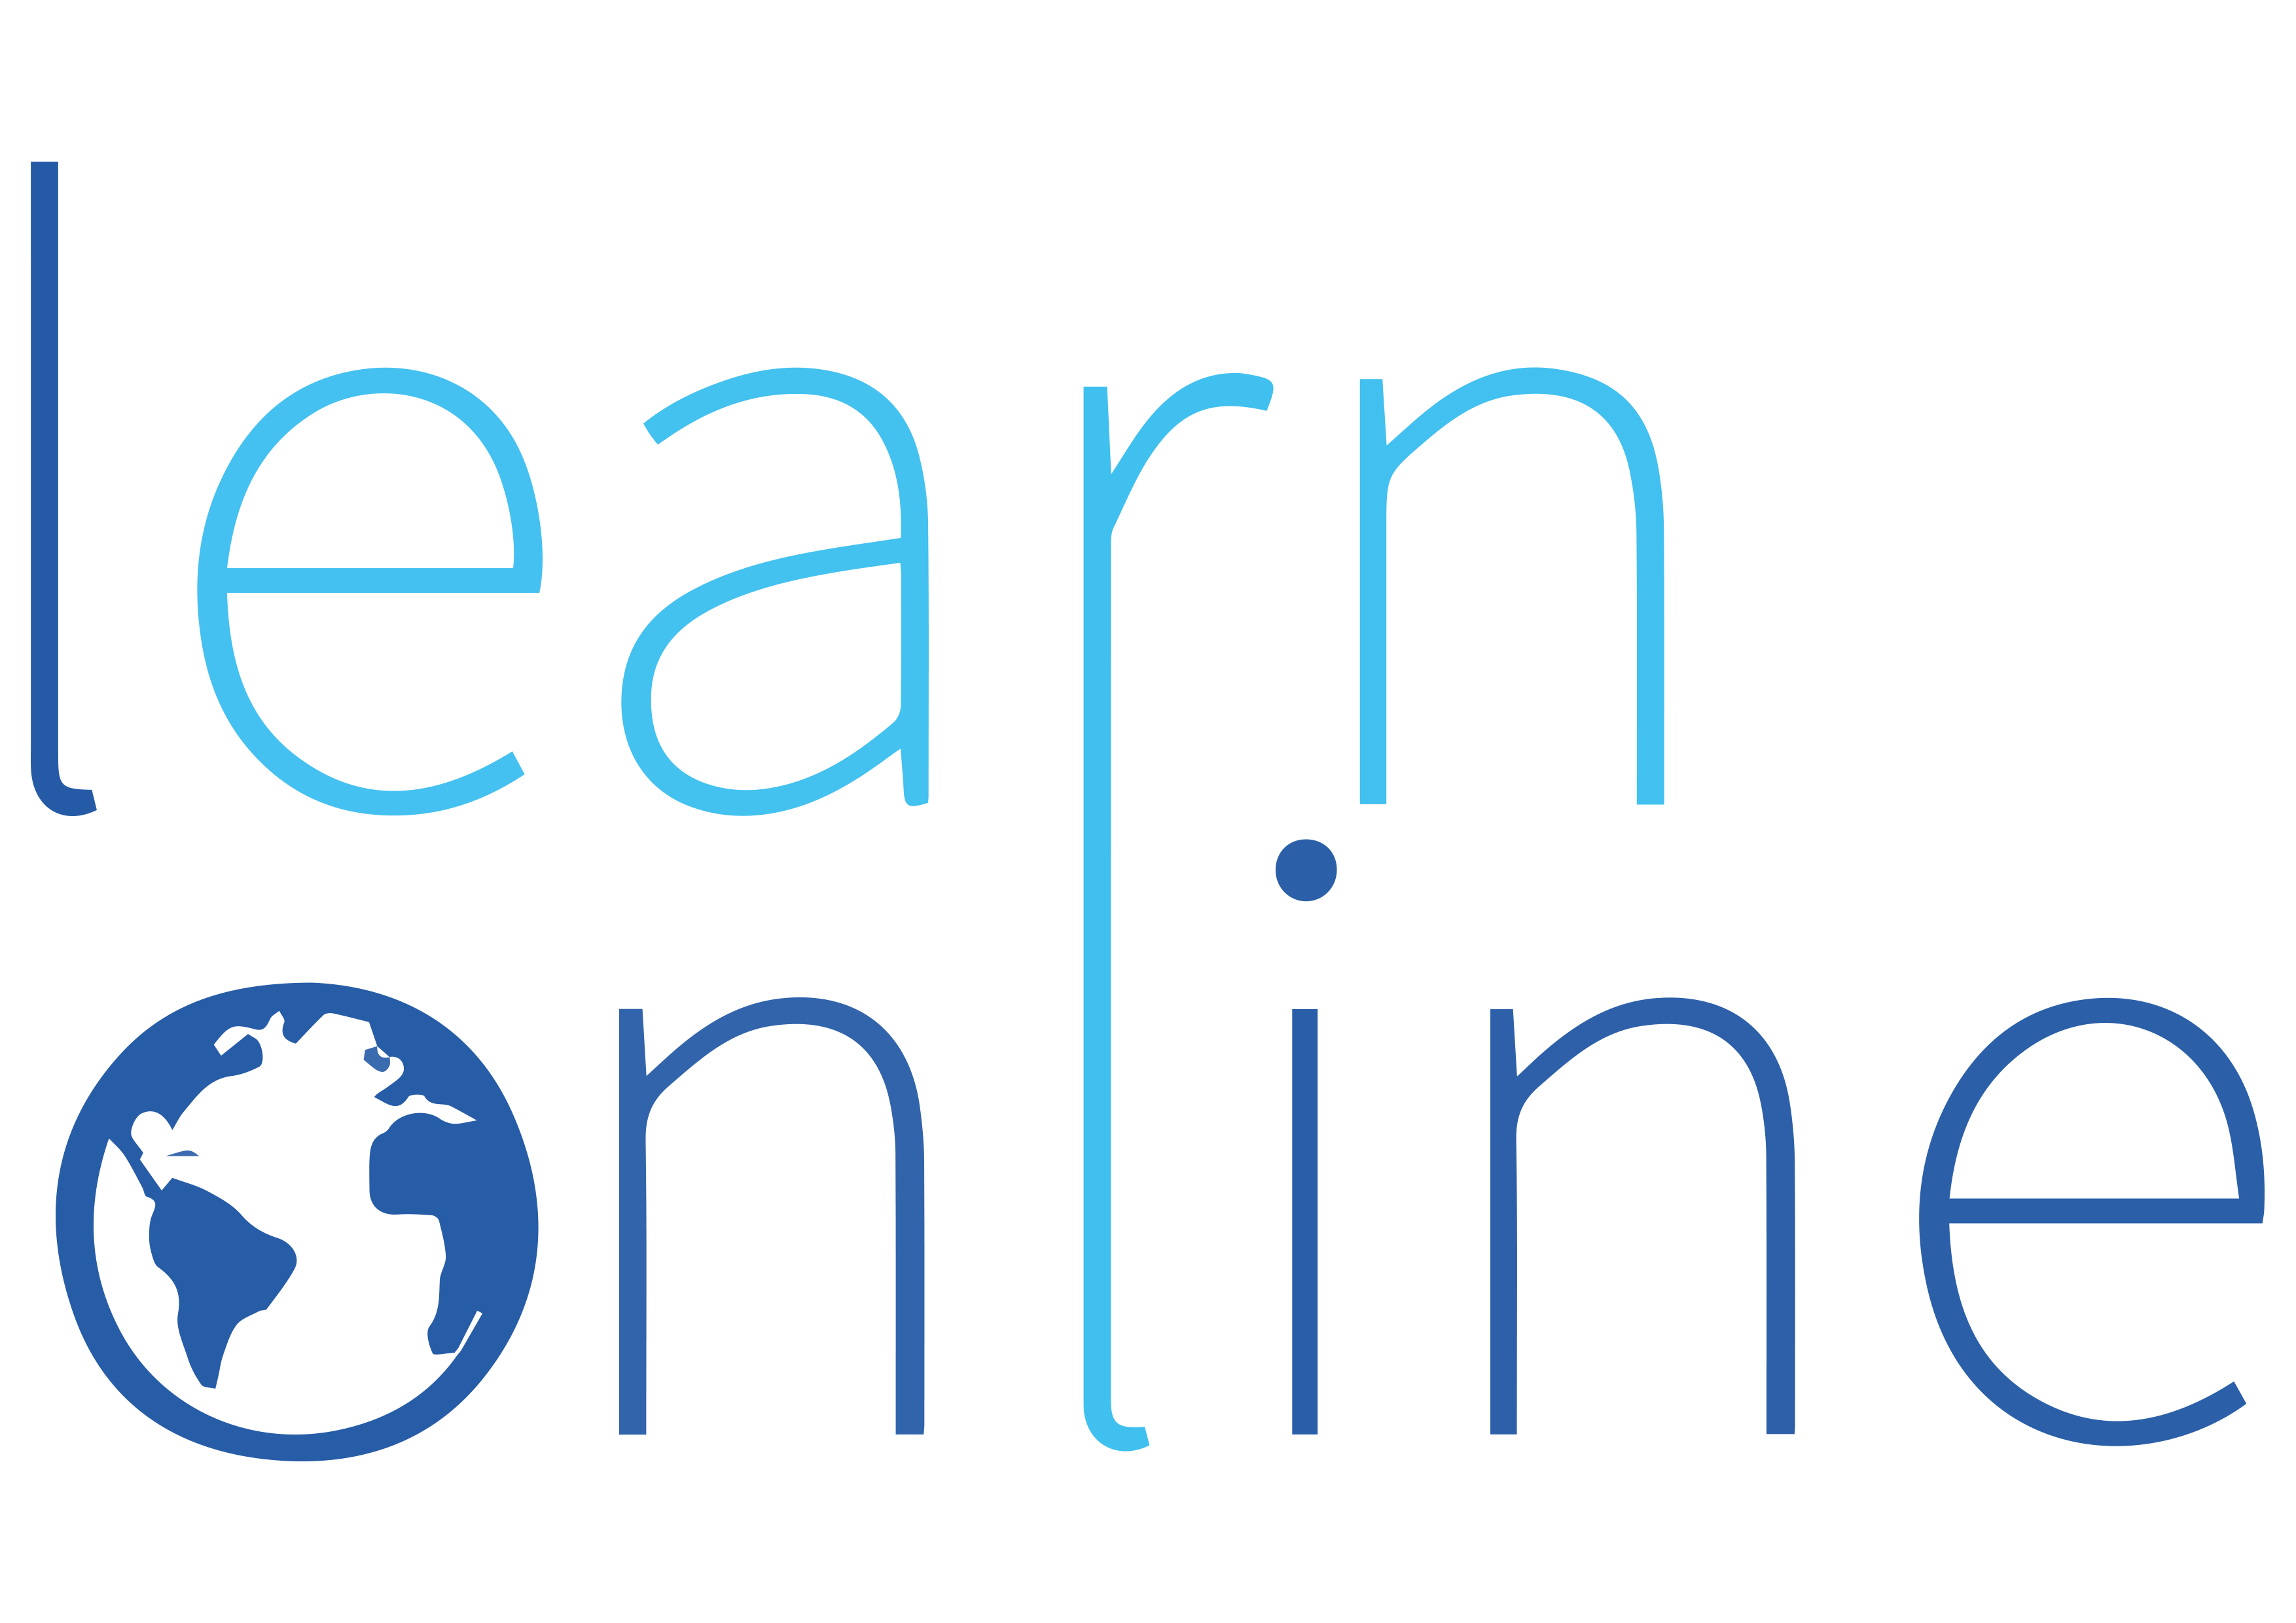 LearnOnline logo. Two shades of blue and the 'o' is the design of a globe